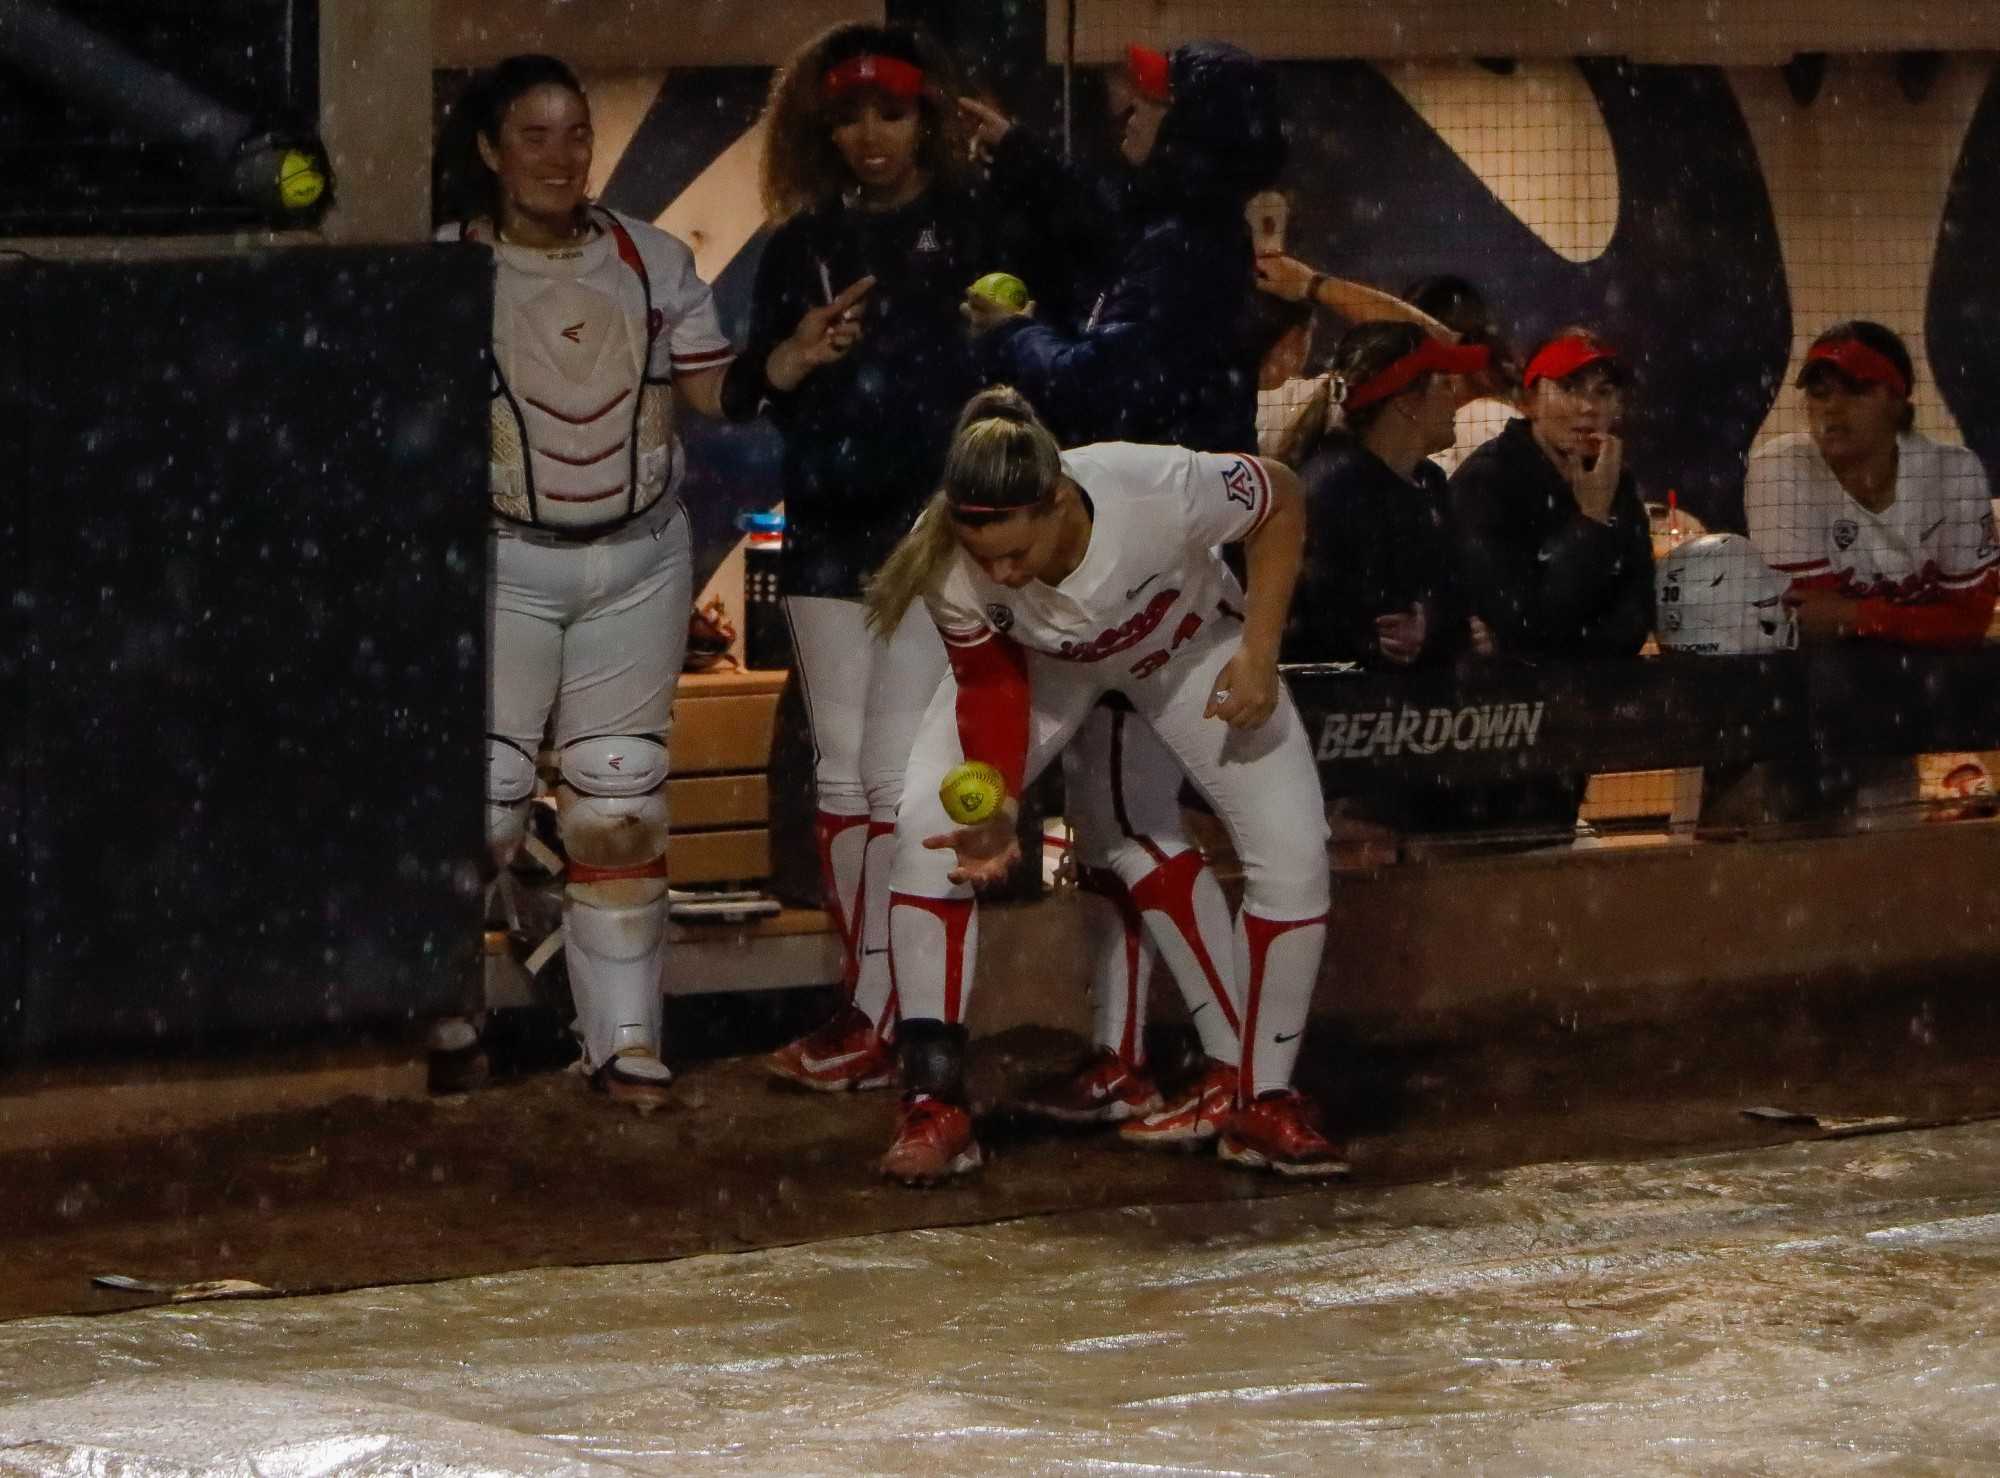 Arizona softball players (pictured left to right) Izzy Pacho, Brianna Hardy and Devyn Netz talk to the New Mexico State University players during a rain delay by throwing a ball back and forth with writing on it in Rita Hillenbrand Memorial Stadium on March 15. Arizona won both games against New Mexico, winning the first game by 10 runs and the second game by 8 runs. 